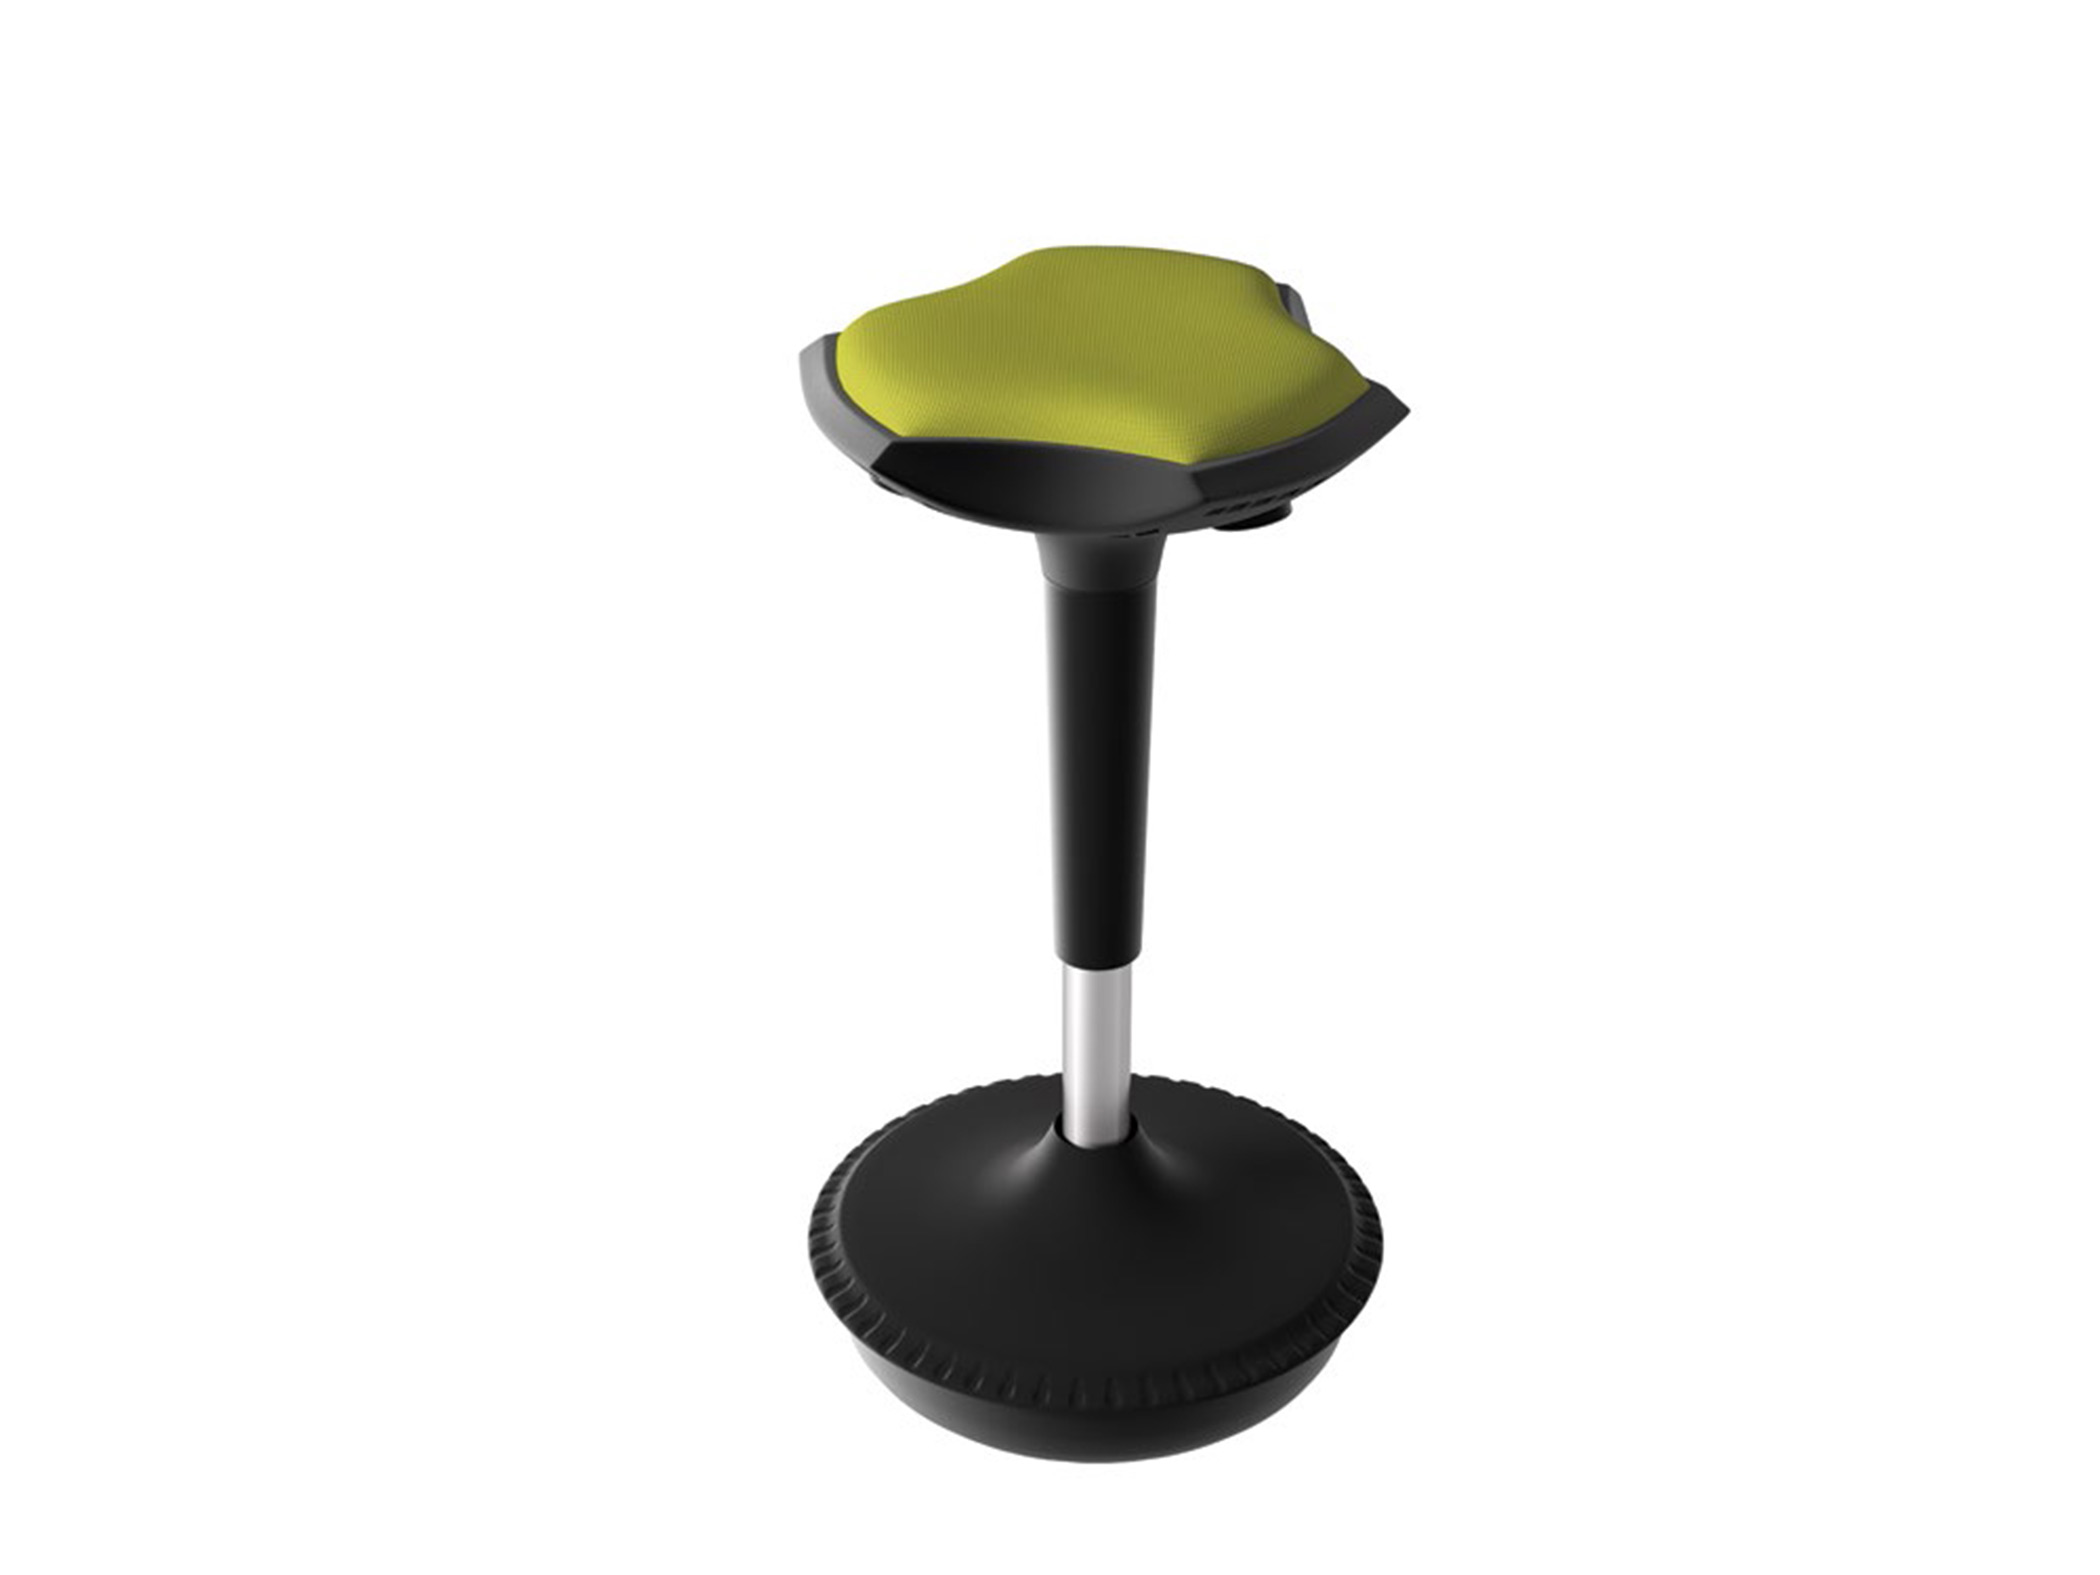 Cubicle Furniture from Compel - Pogo stool